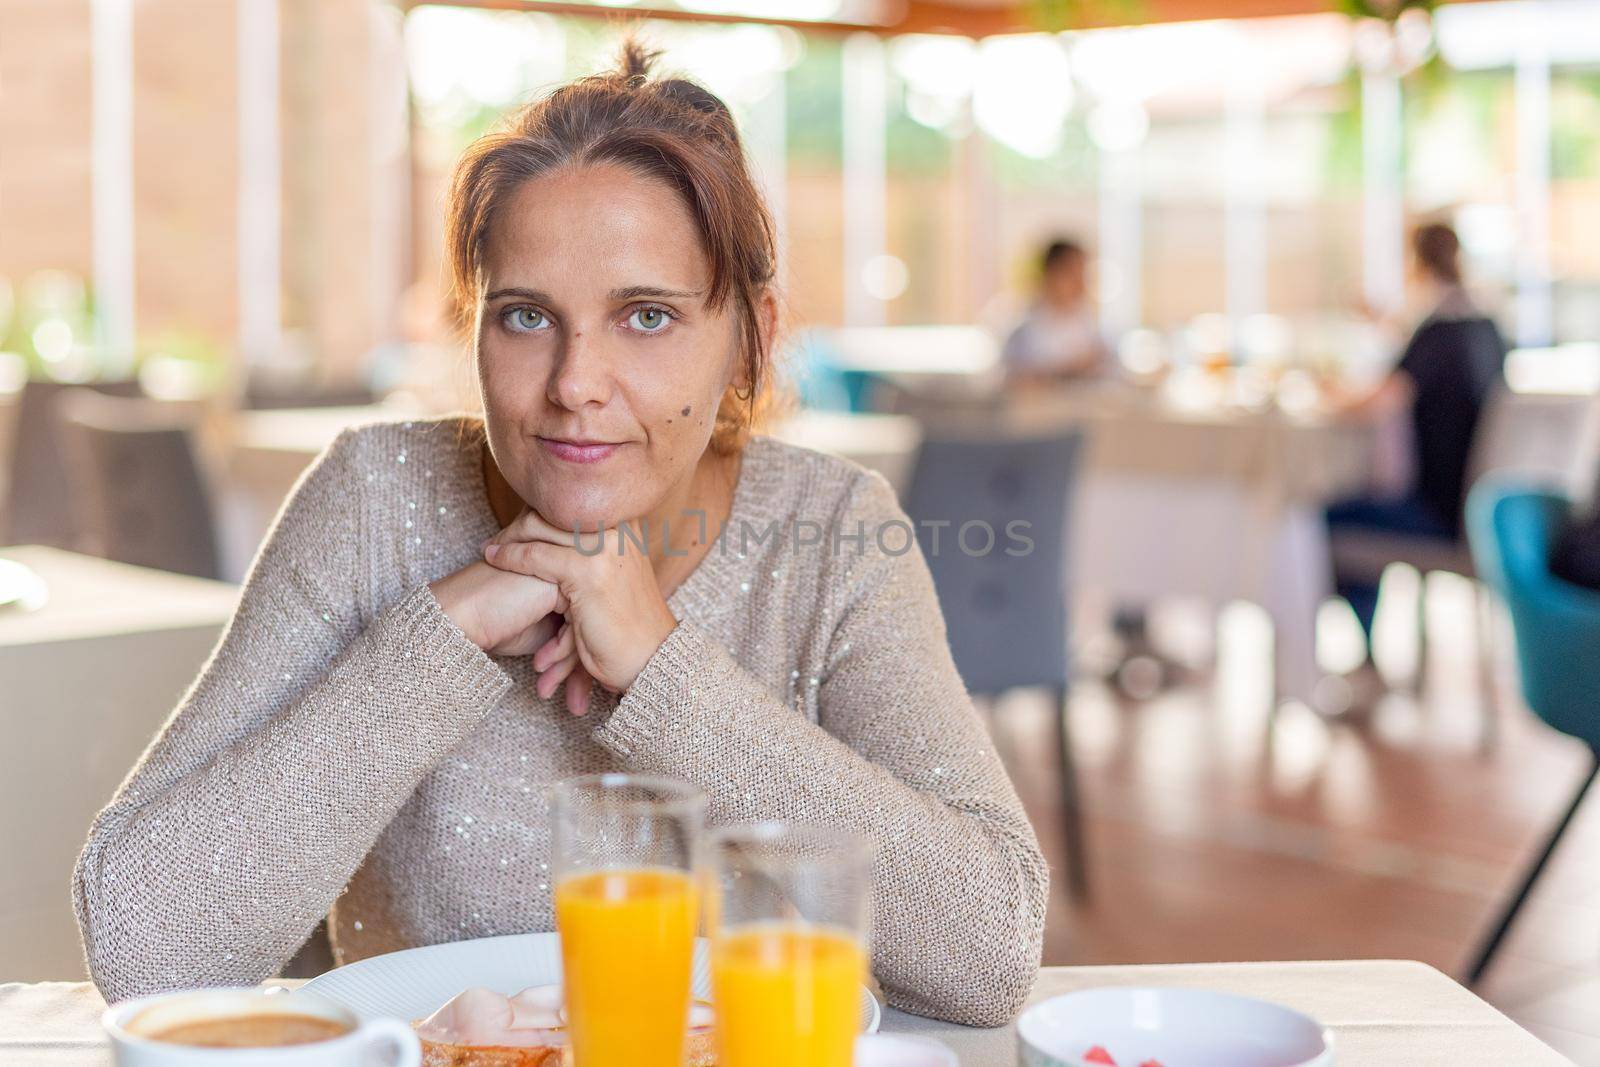 Front view of an adult woman having breakfast in hotel where she is staying while looking at the camera. Concept of breakfast in hotel.